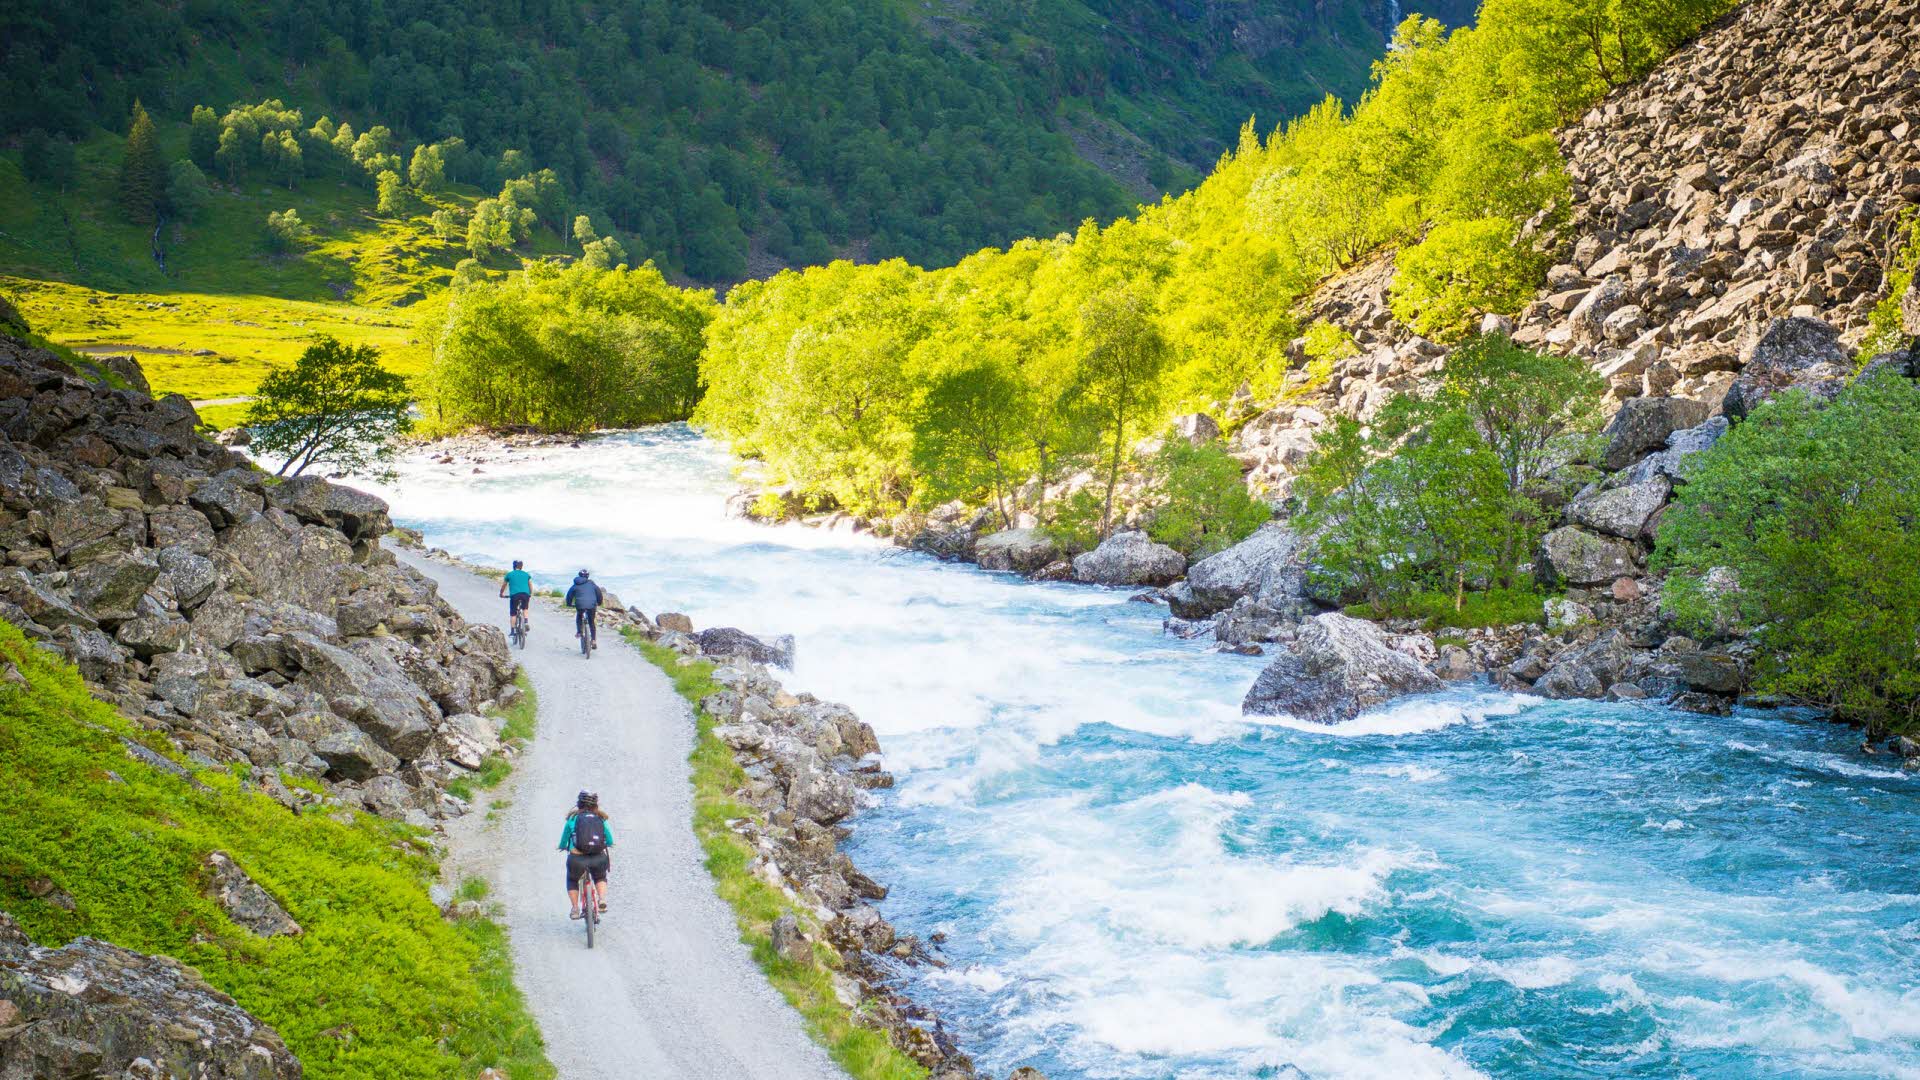 Cyclists on a gravel road next to the blue and white Flåm river.